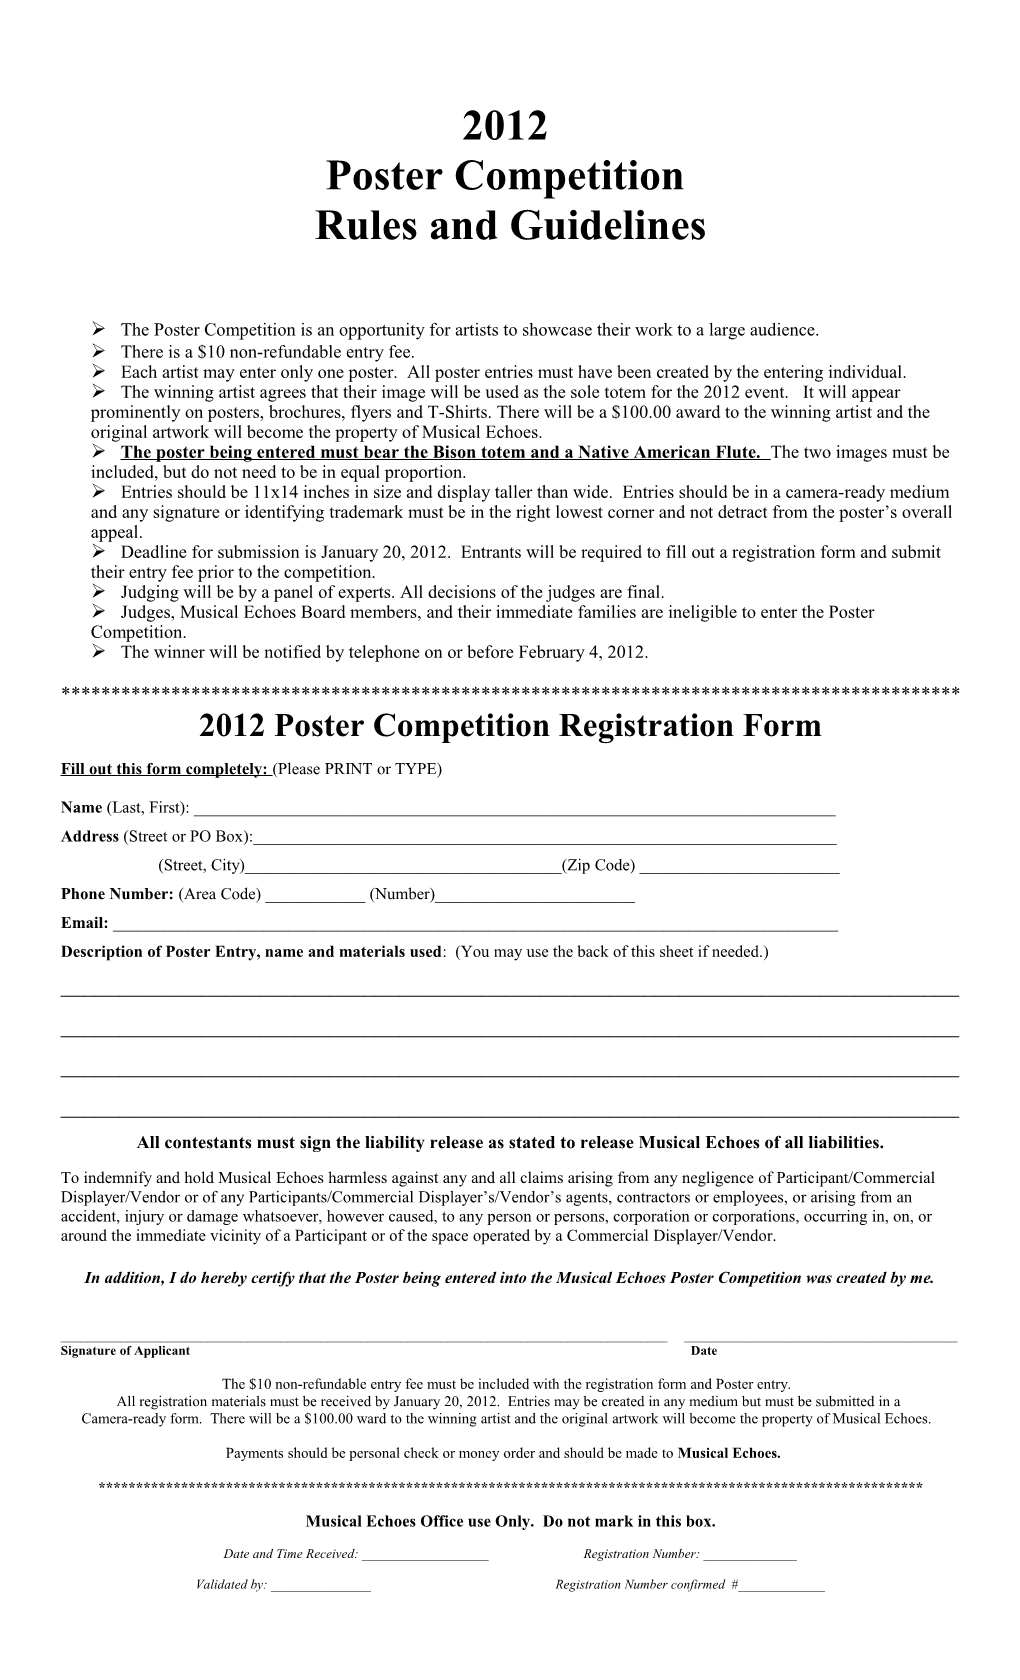 Download the Poster Competition Registration Document Here